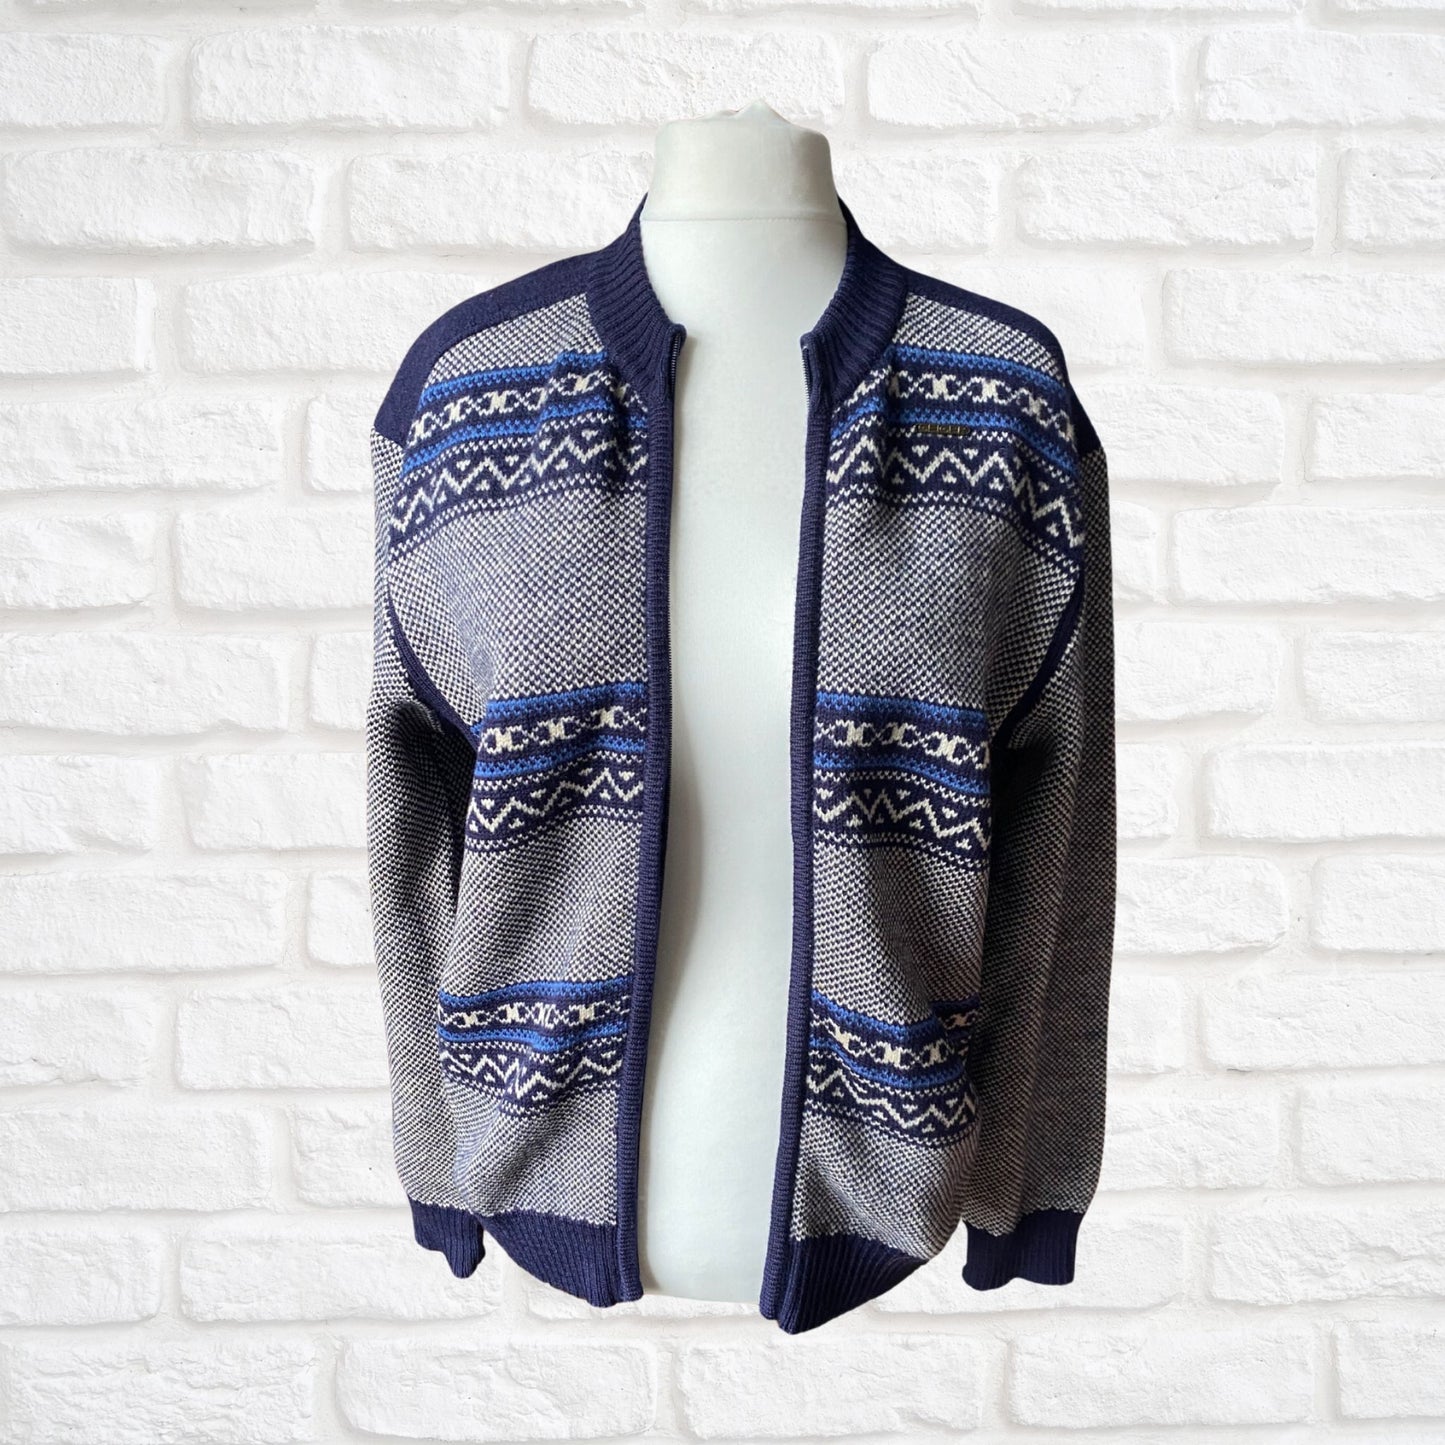 Vintage Blue and White Patterned  Zip Up Wool Cardigan. Approx UK size L -  XL ( men) / 20-22 (women)